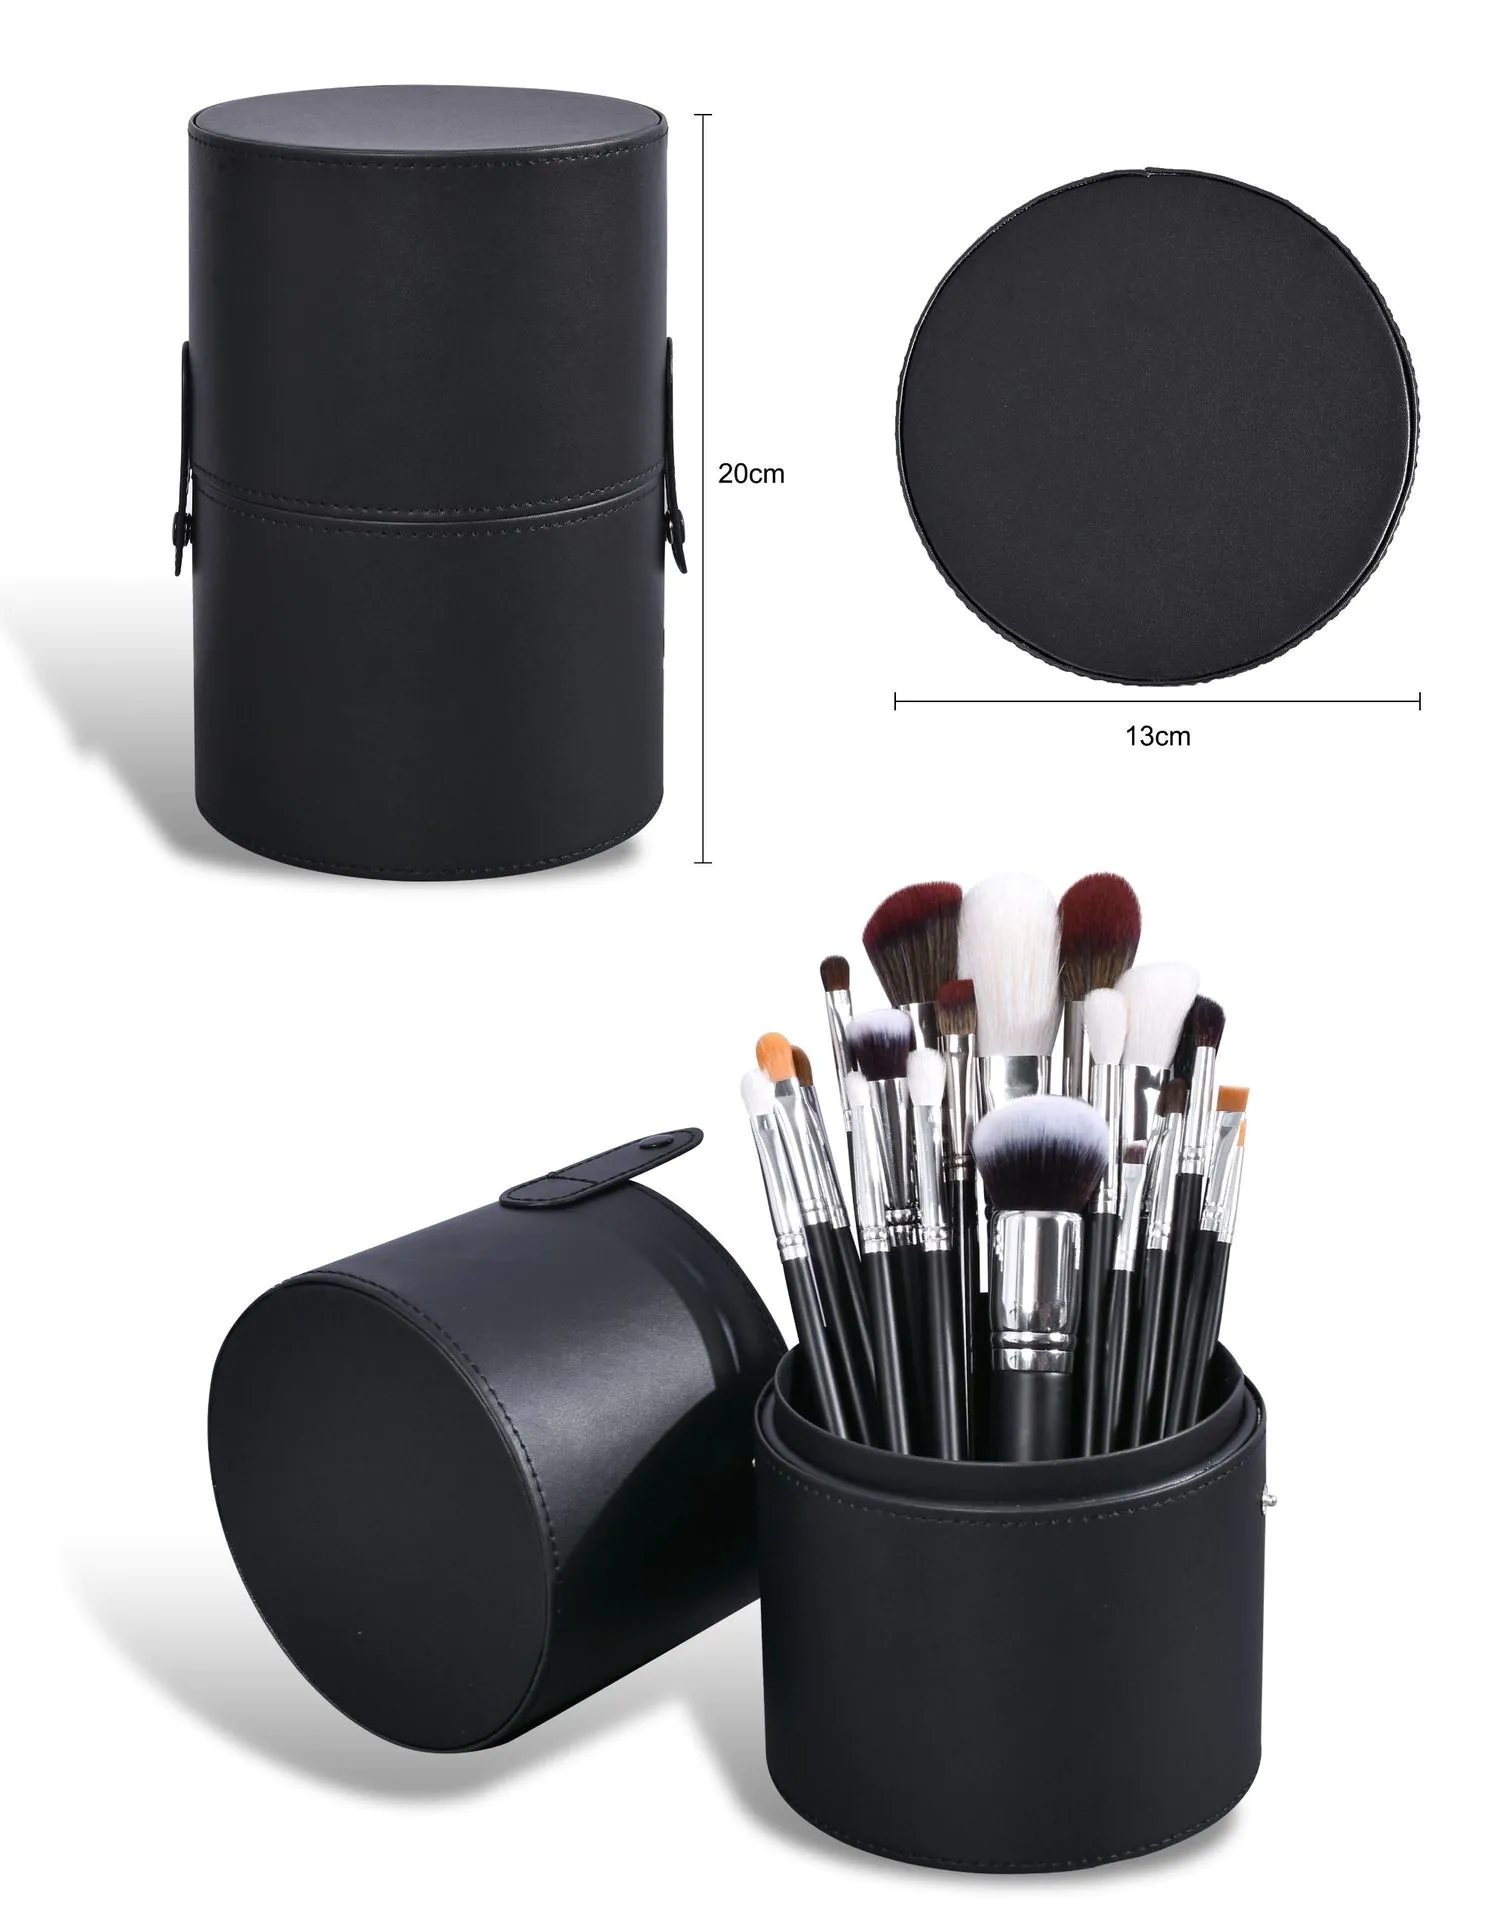 Suprabeauty personalized makeup brushes Supply for women